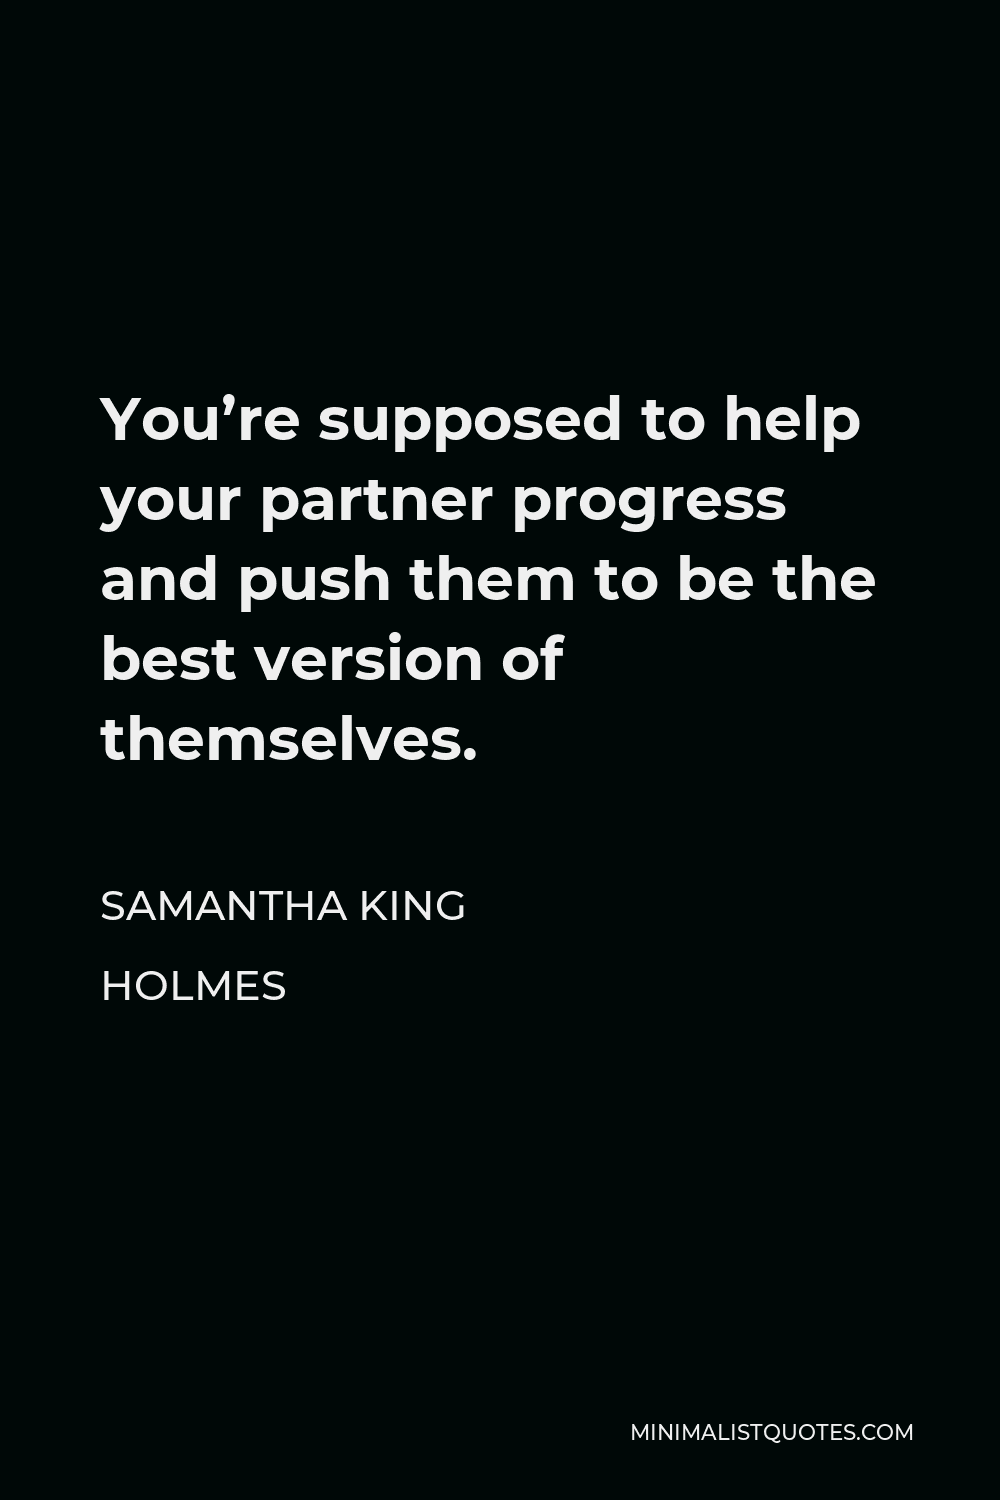 Samantha King Holmes Quote - You’re supposed to help your partner progress and push them to be the best version of themselves.